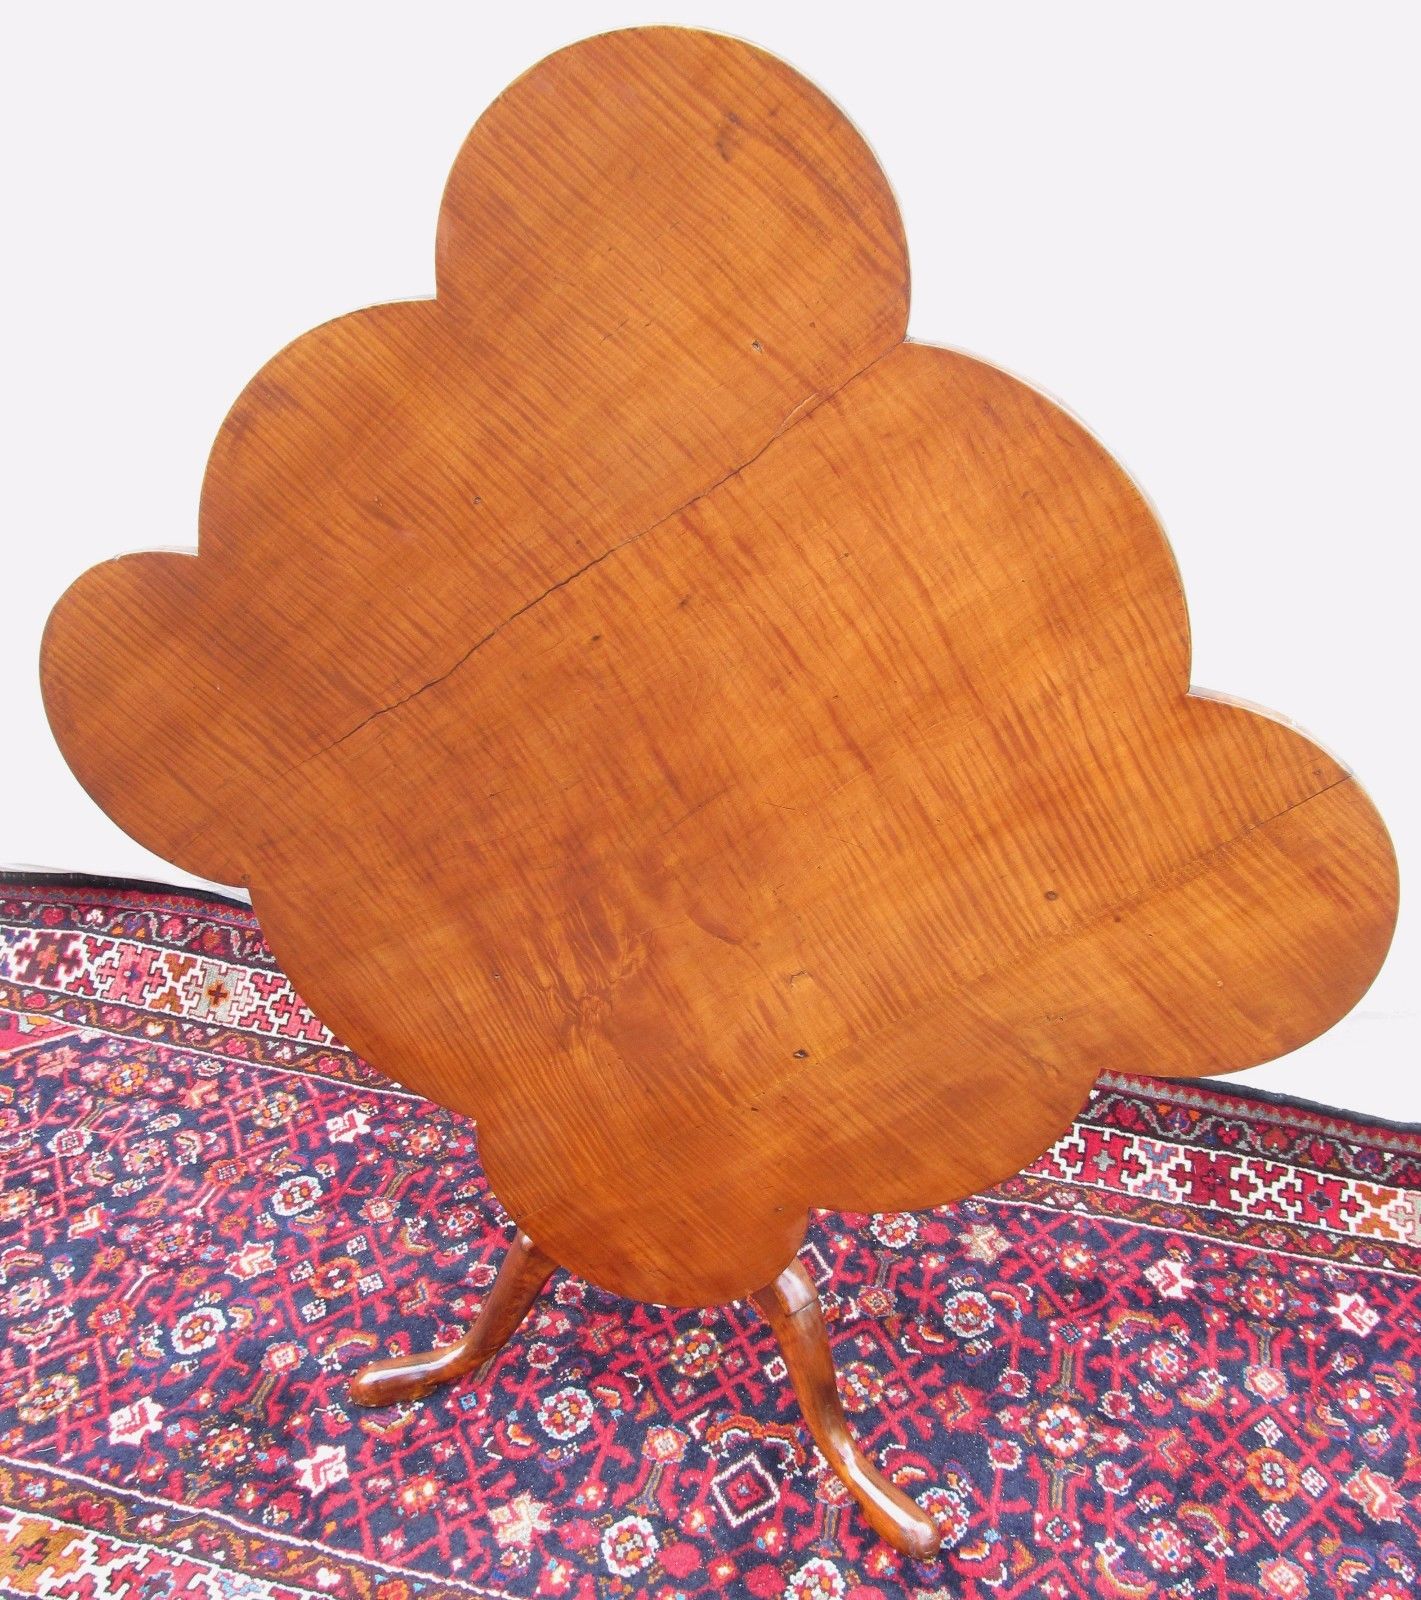 FINE 18TH CENTURY RARE FEDERAL PERIOD CLOVER SHAPED TIGER MAPLE TIP TOP TABLE